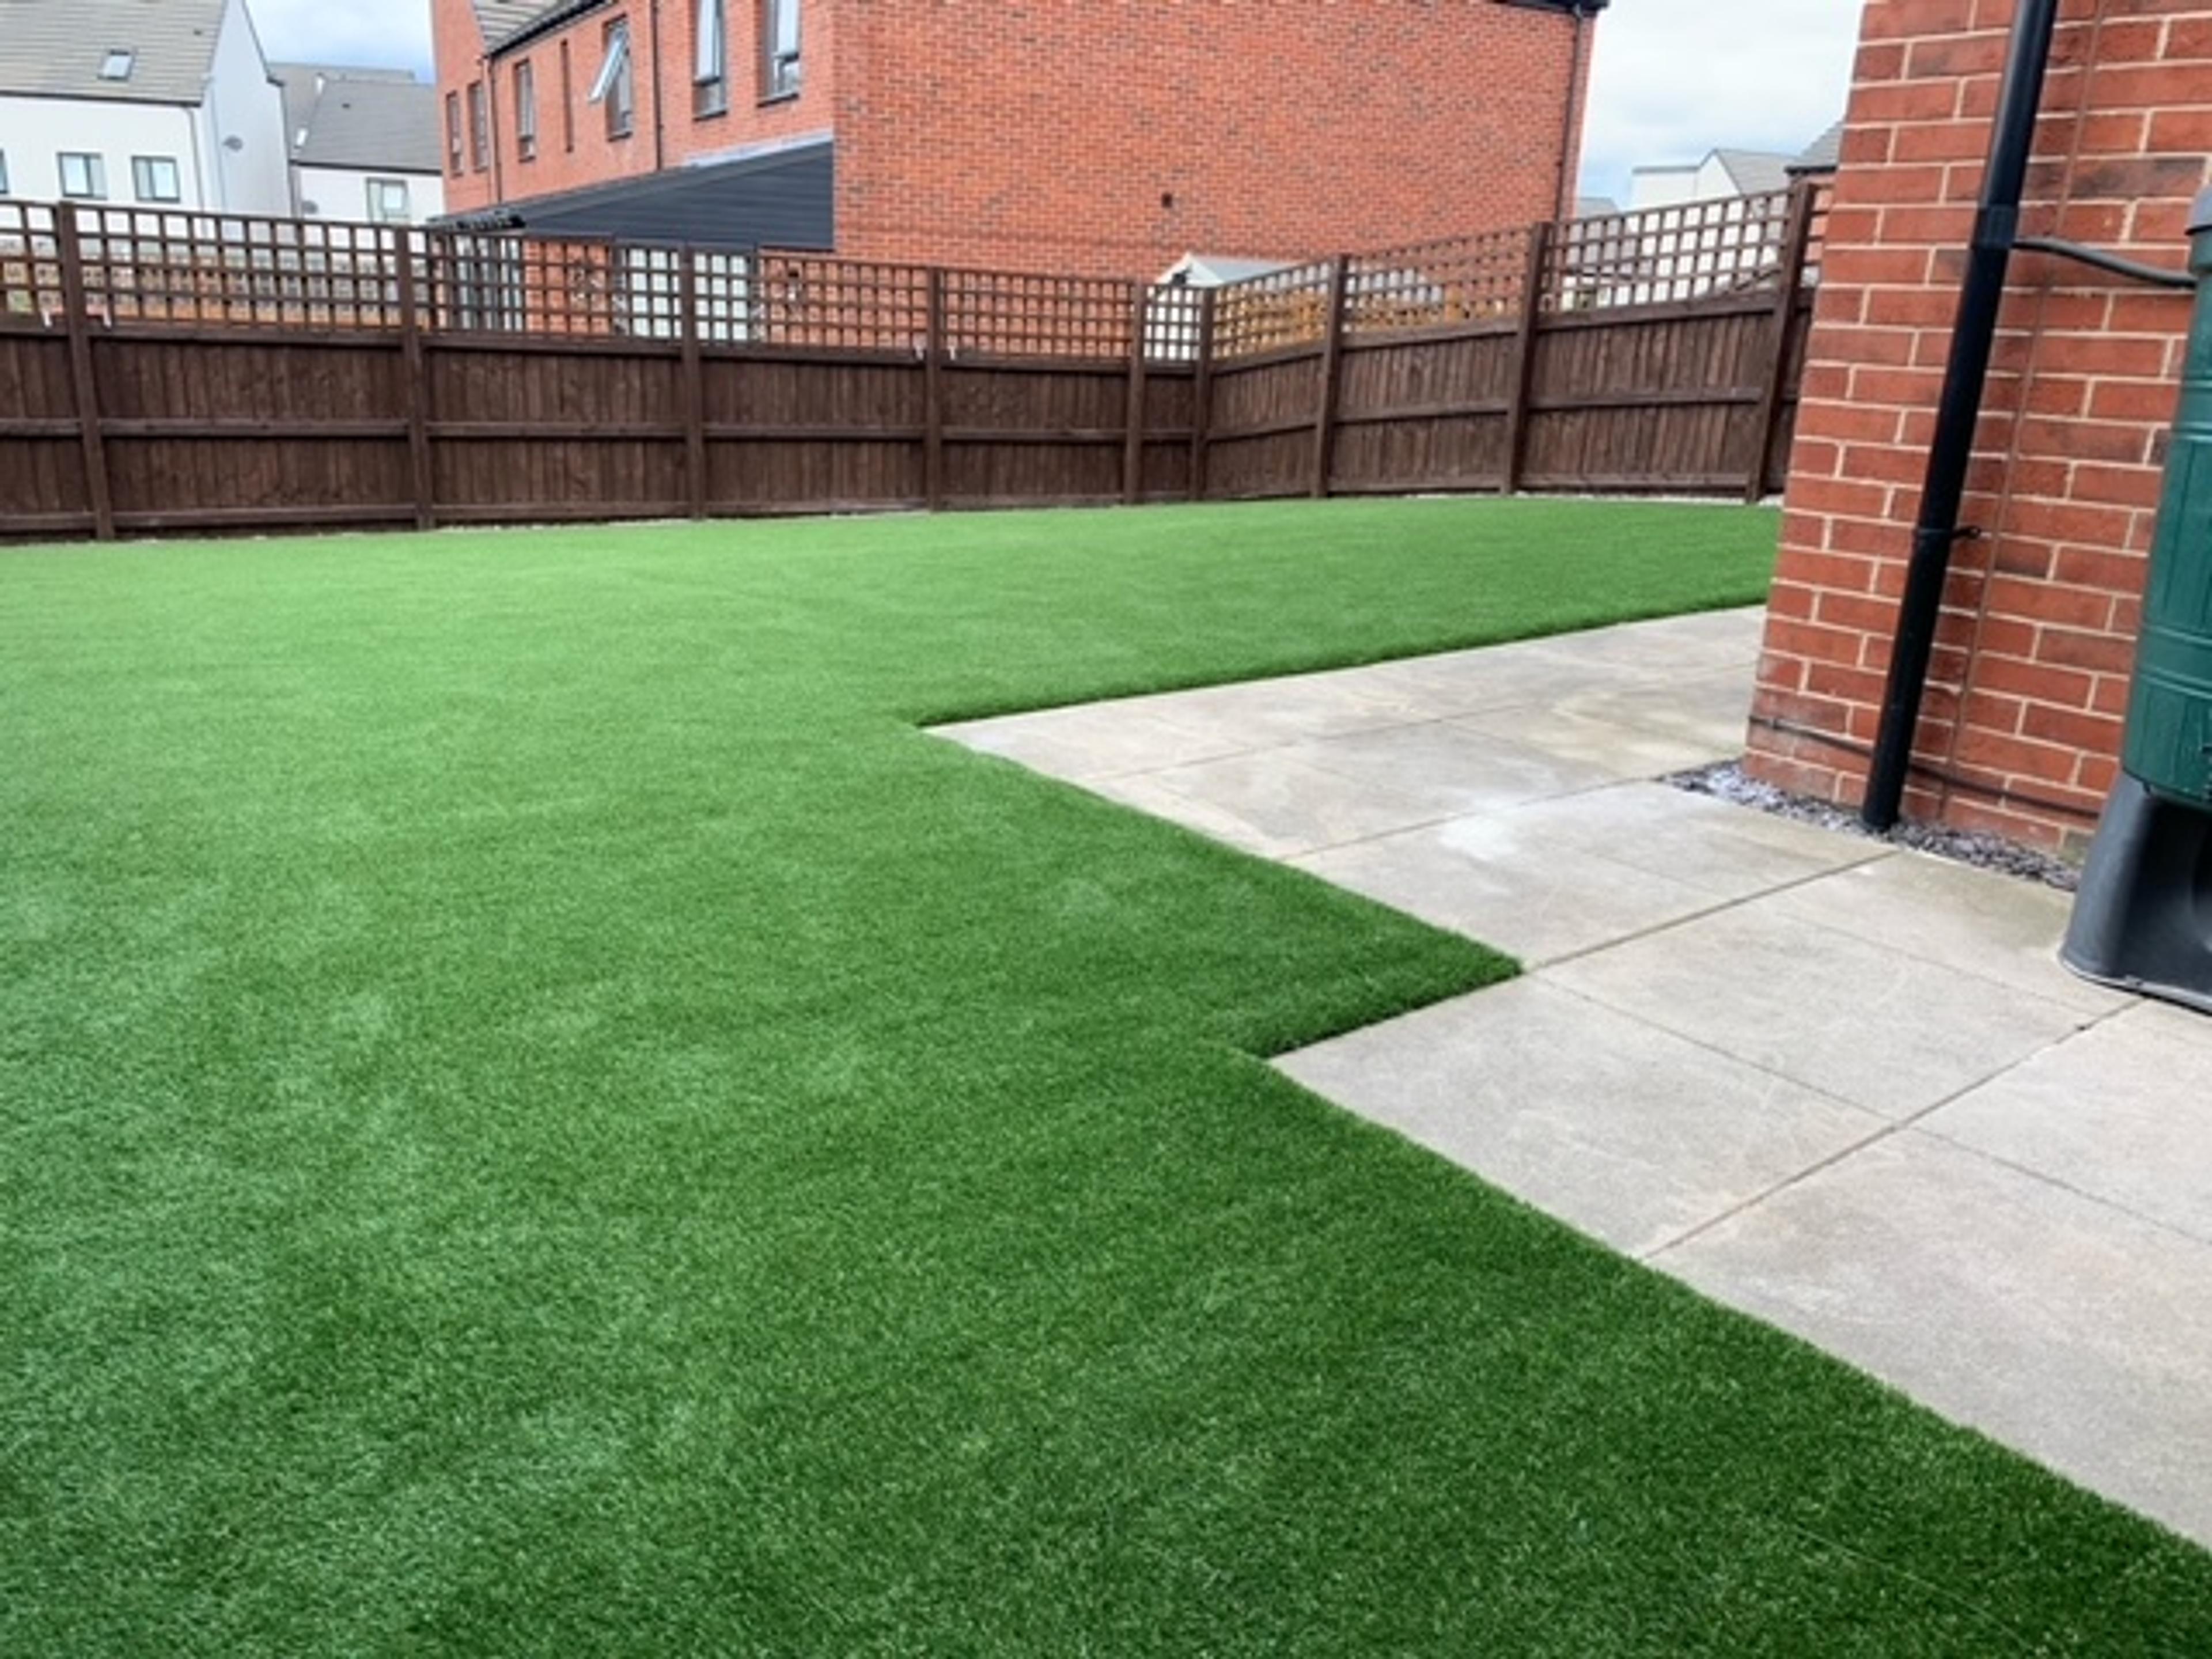 Artificial grass supply & installation Parsons Cross, South Yorkshire, S5